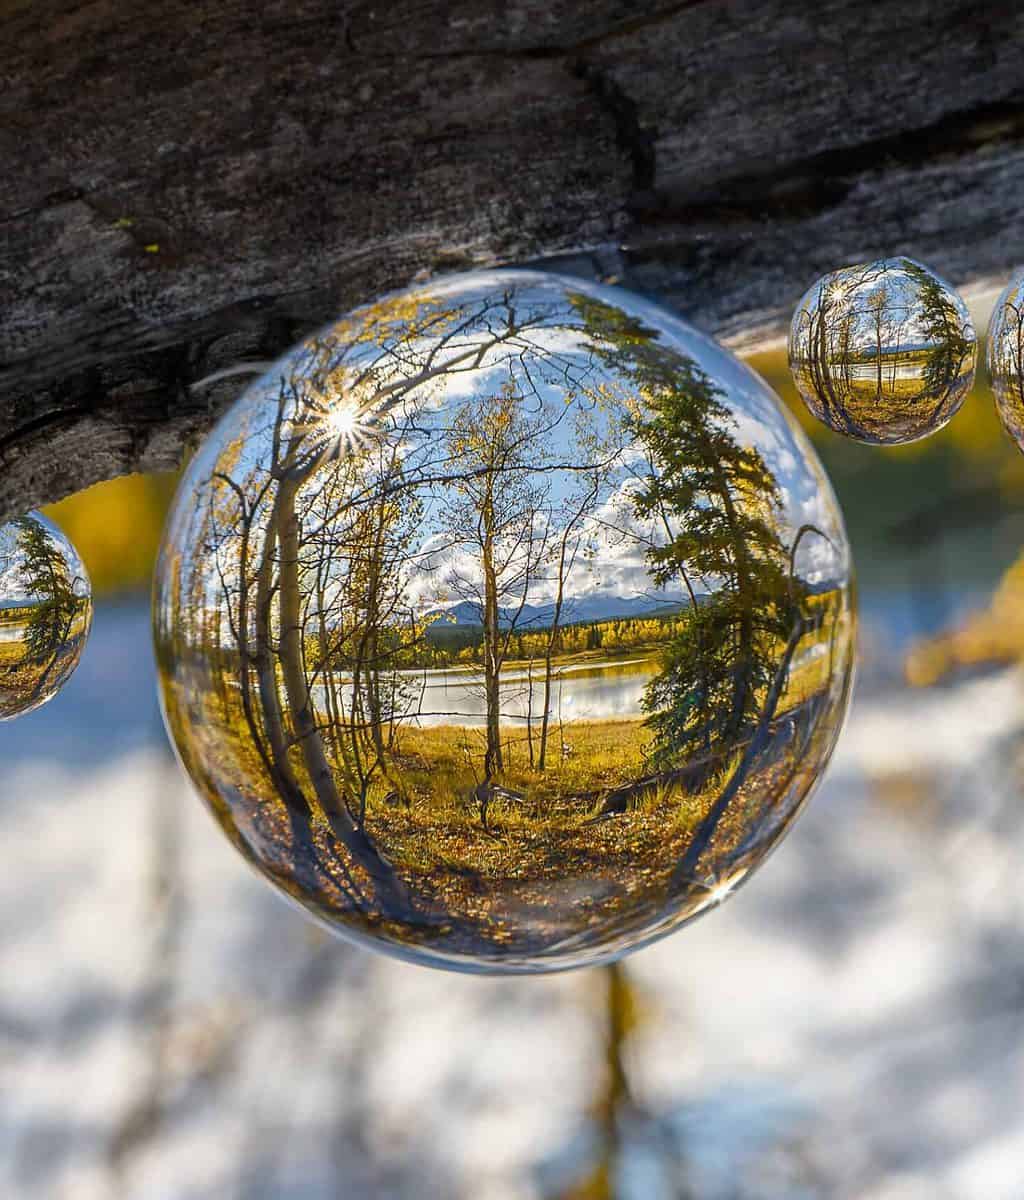 Autumn Spheres of water reflecting trees